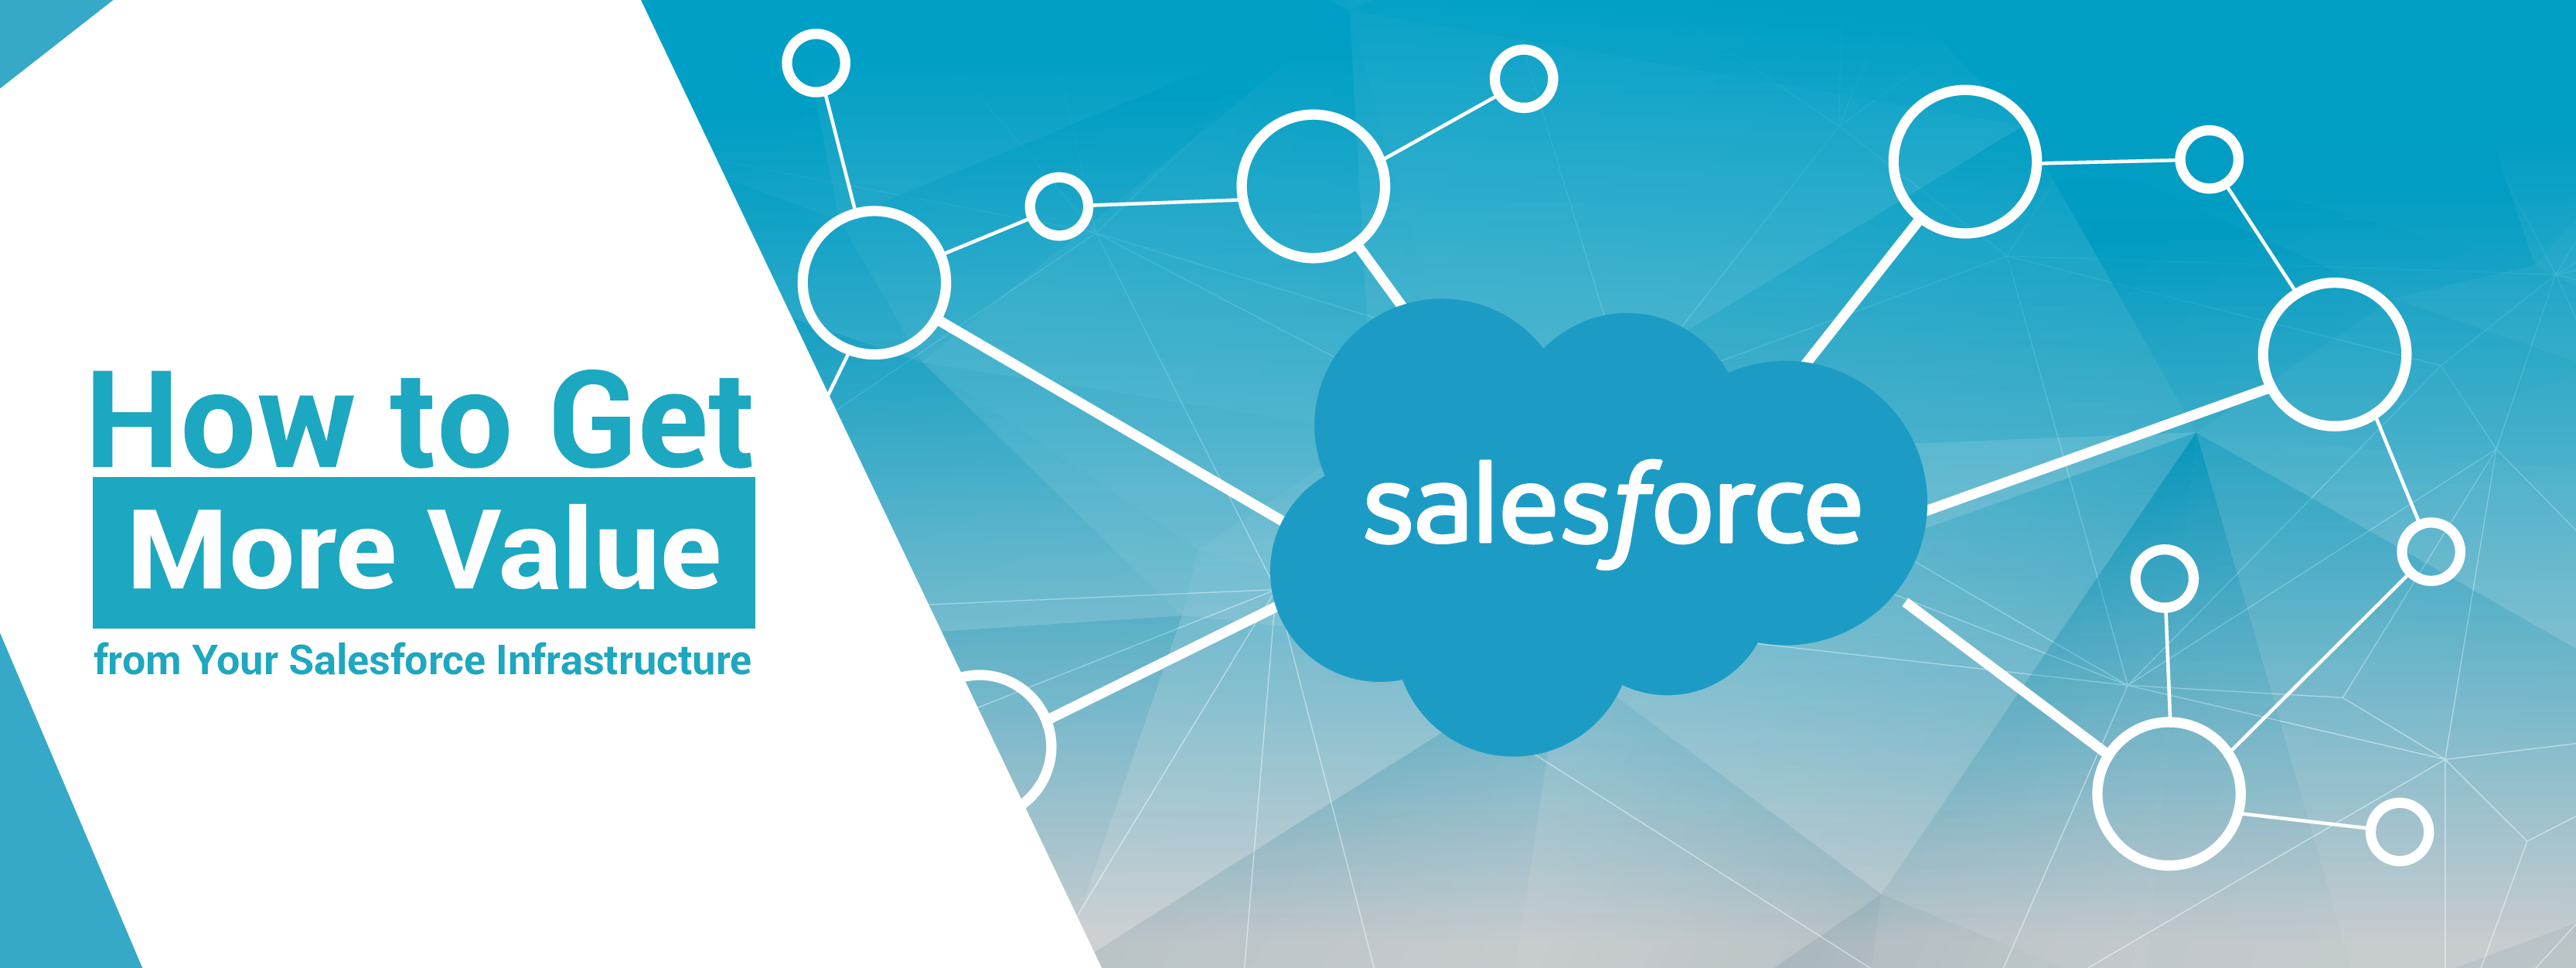 how to get more value from your salesforce infrastrature